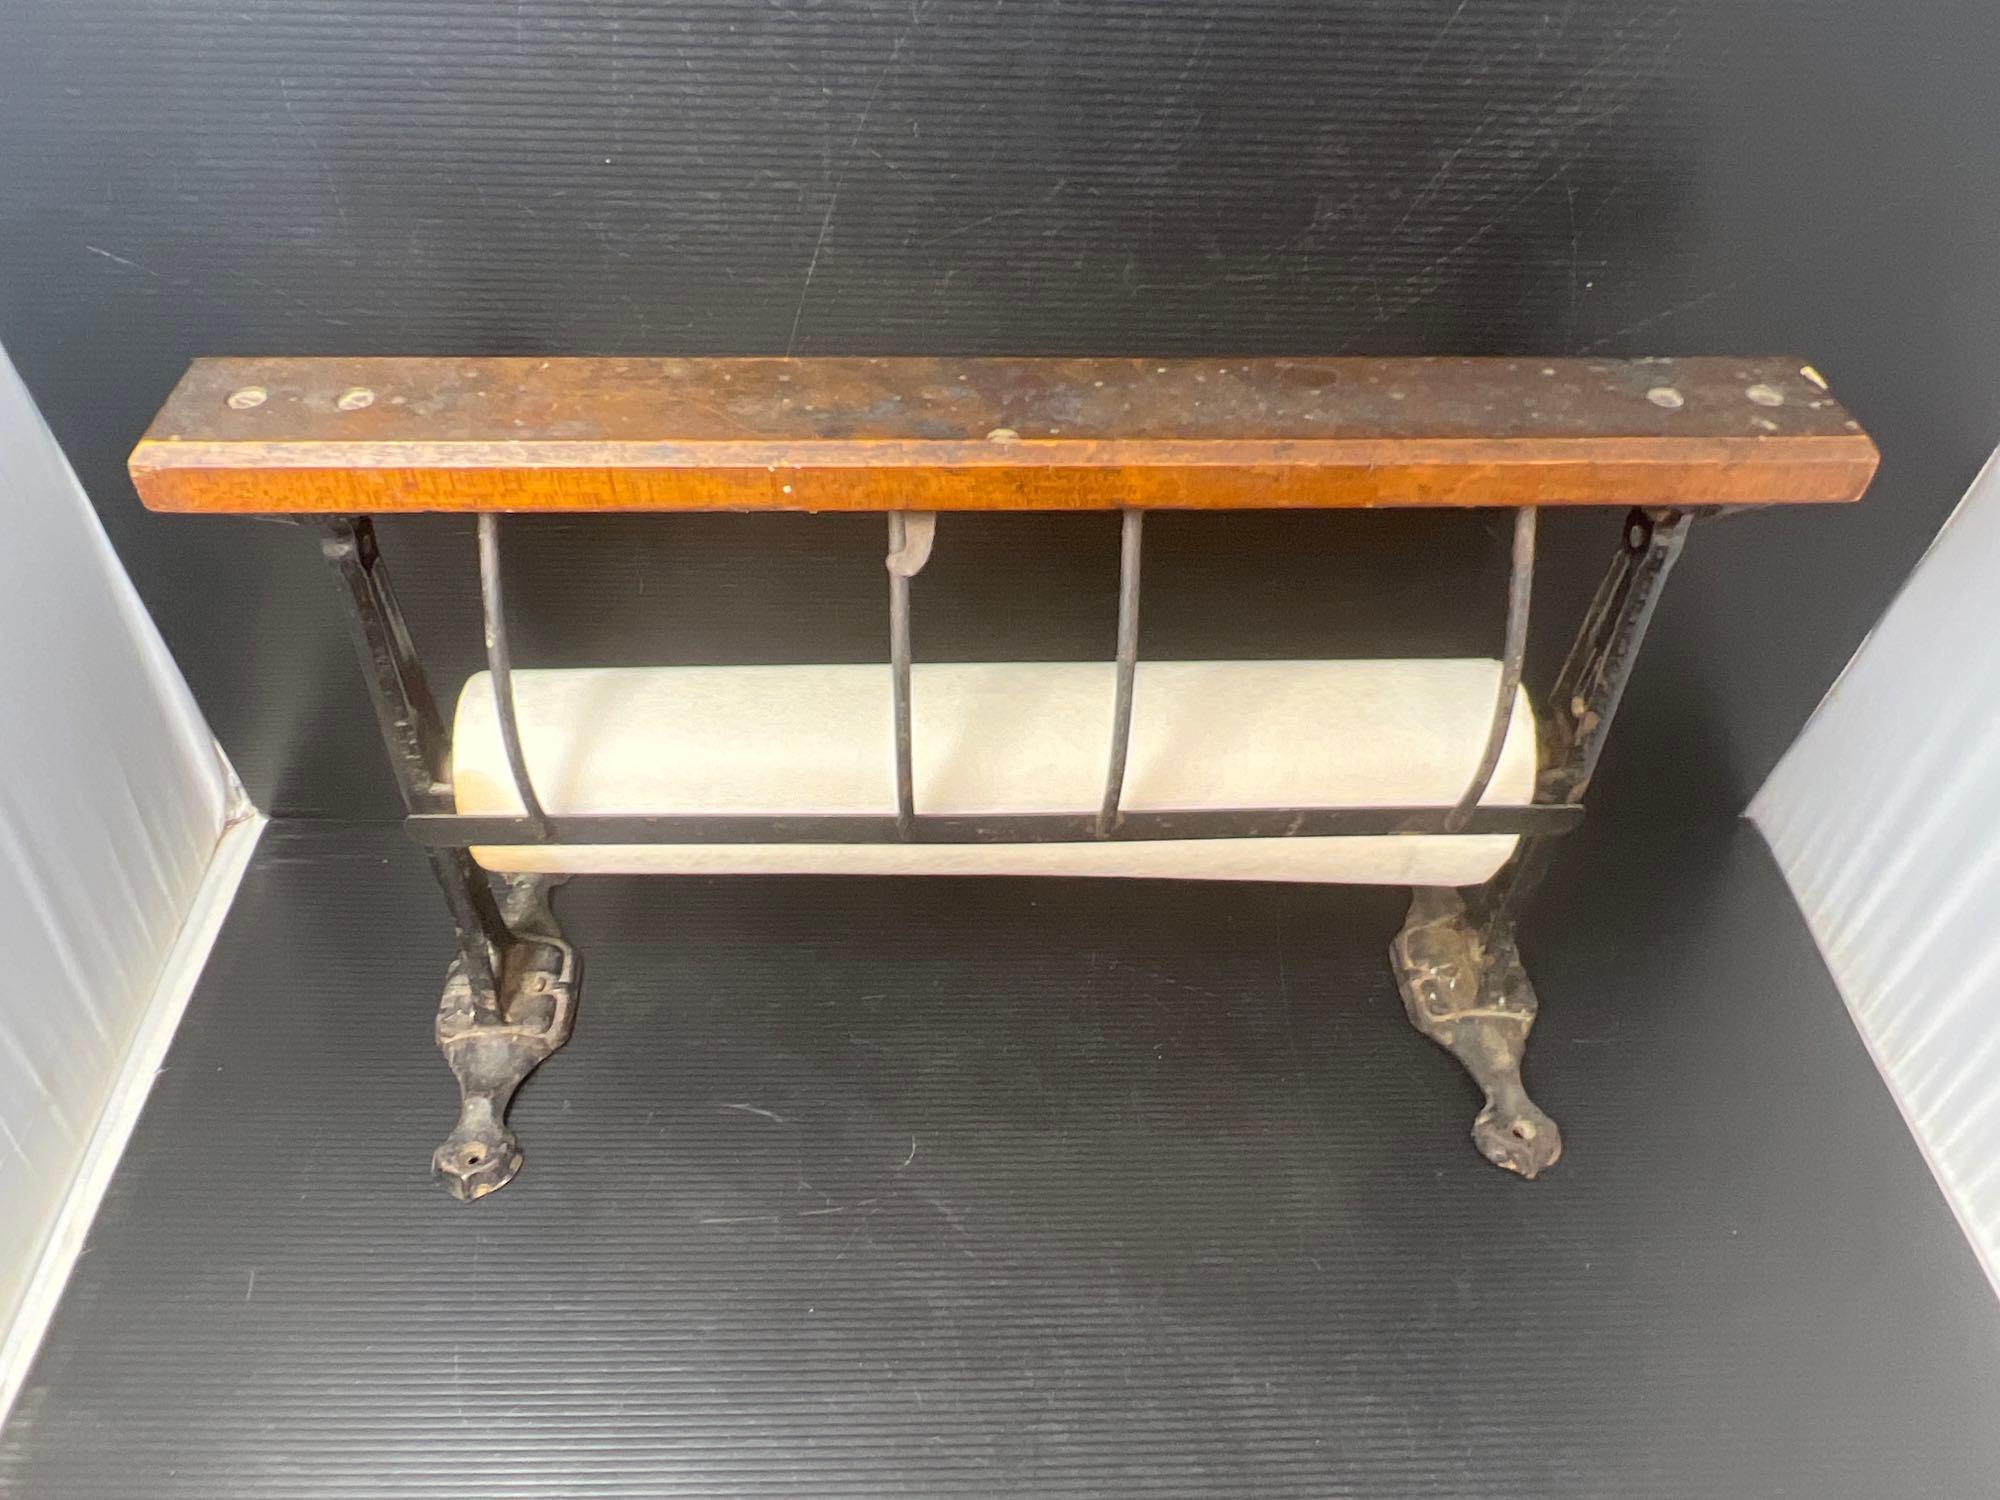 Antique Paper Cutter with Paper, General Store Fixture